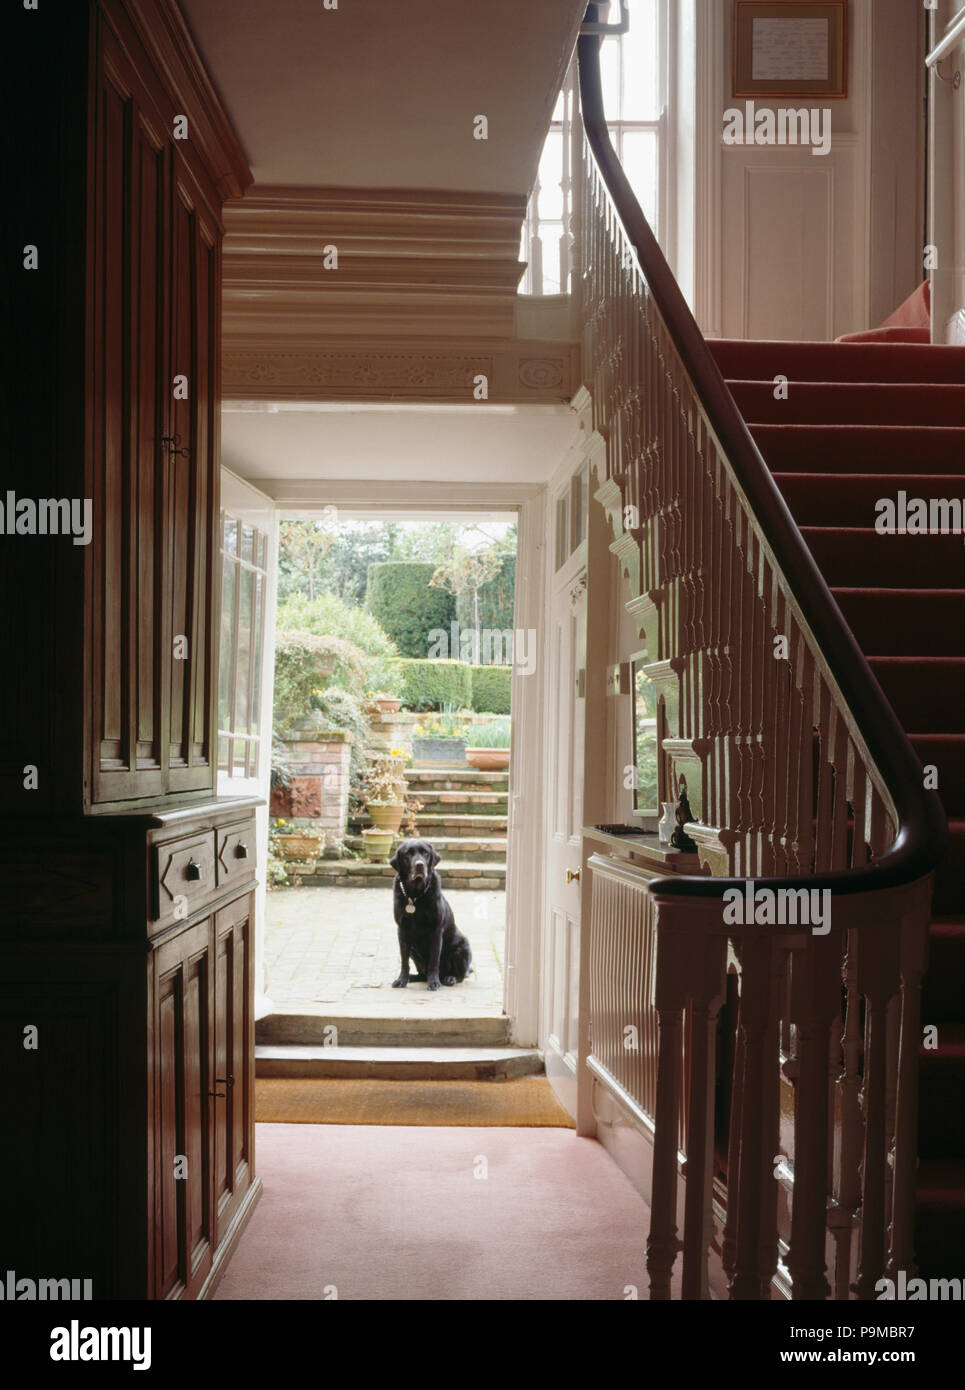 Large cupboard in country hall with dog sitting in open doorway Stock Photo